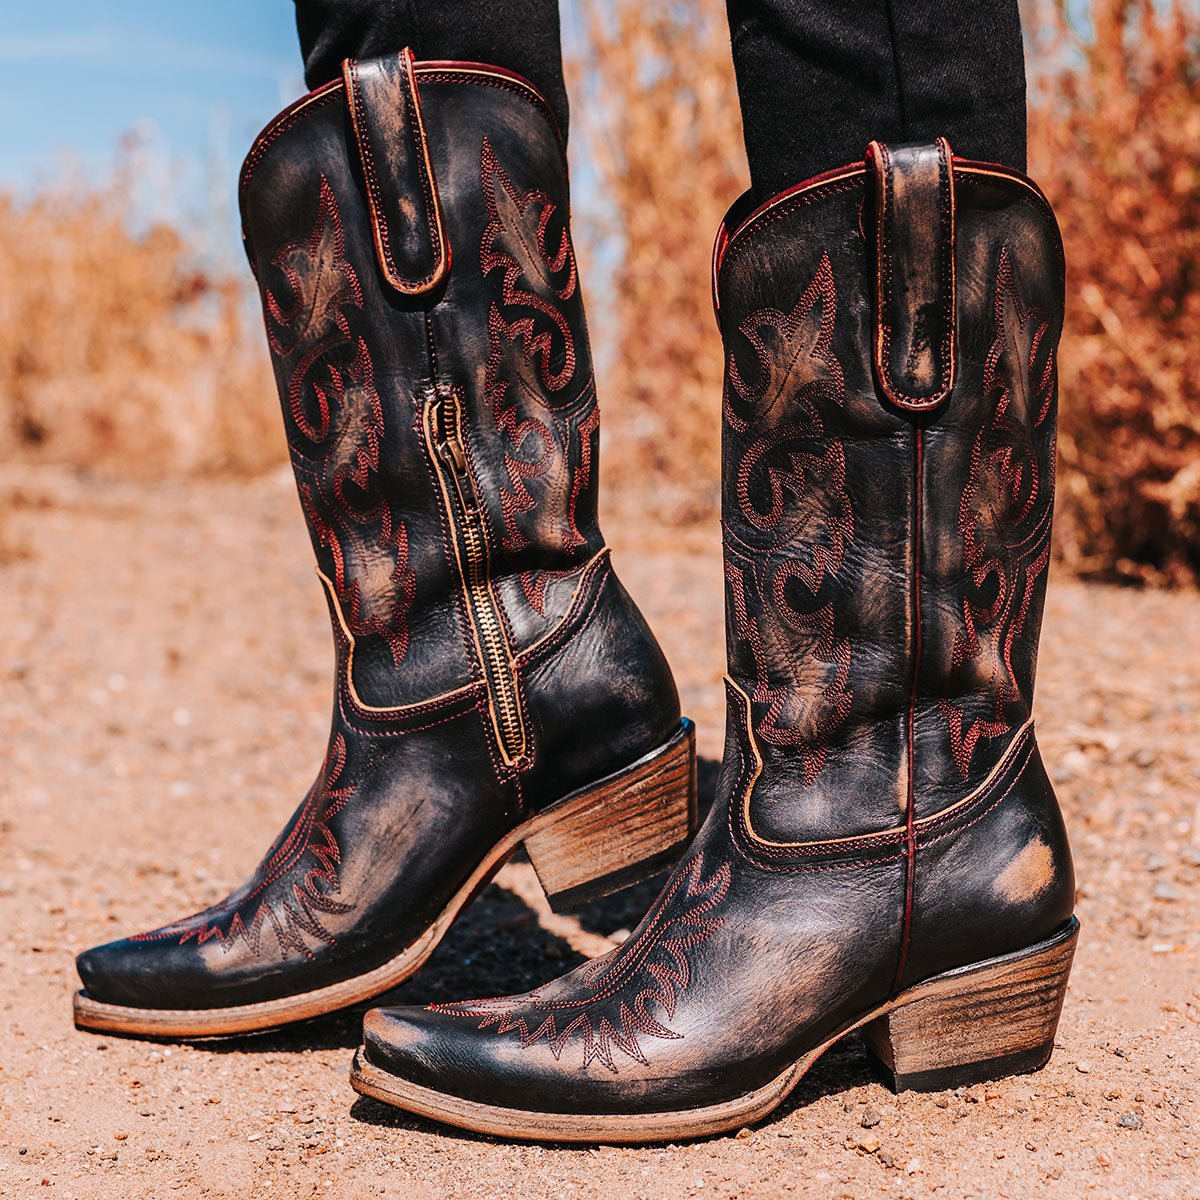 FREEBIRD women's Wilson Black leather western boot with snip toe construction, intricate shaft and toe stitching, and half zip closure